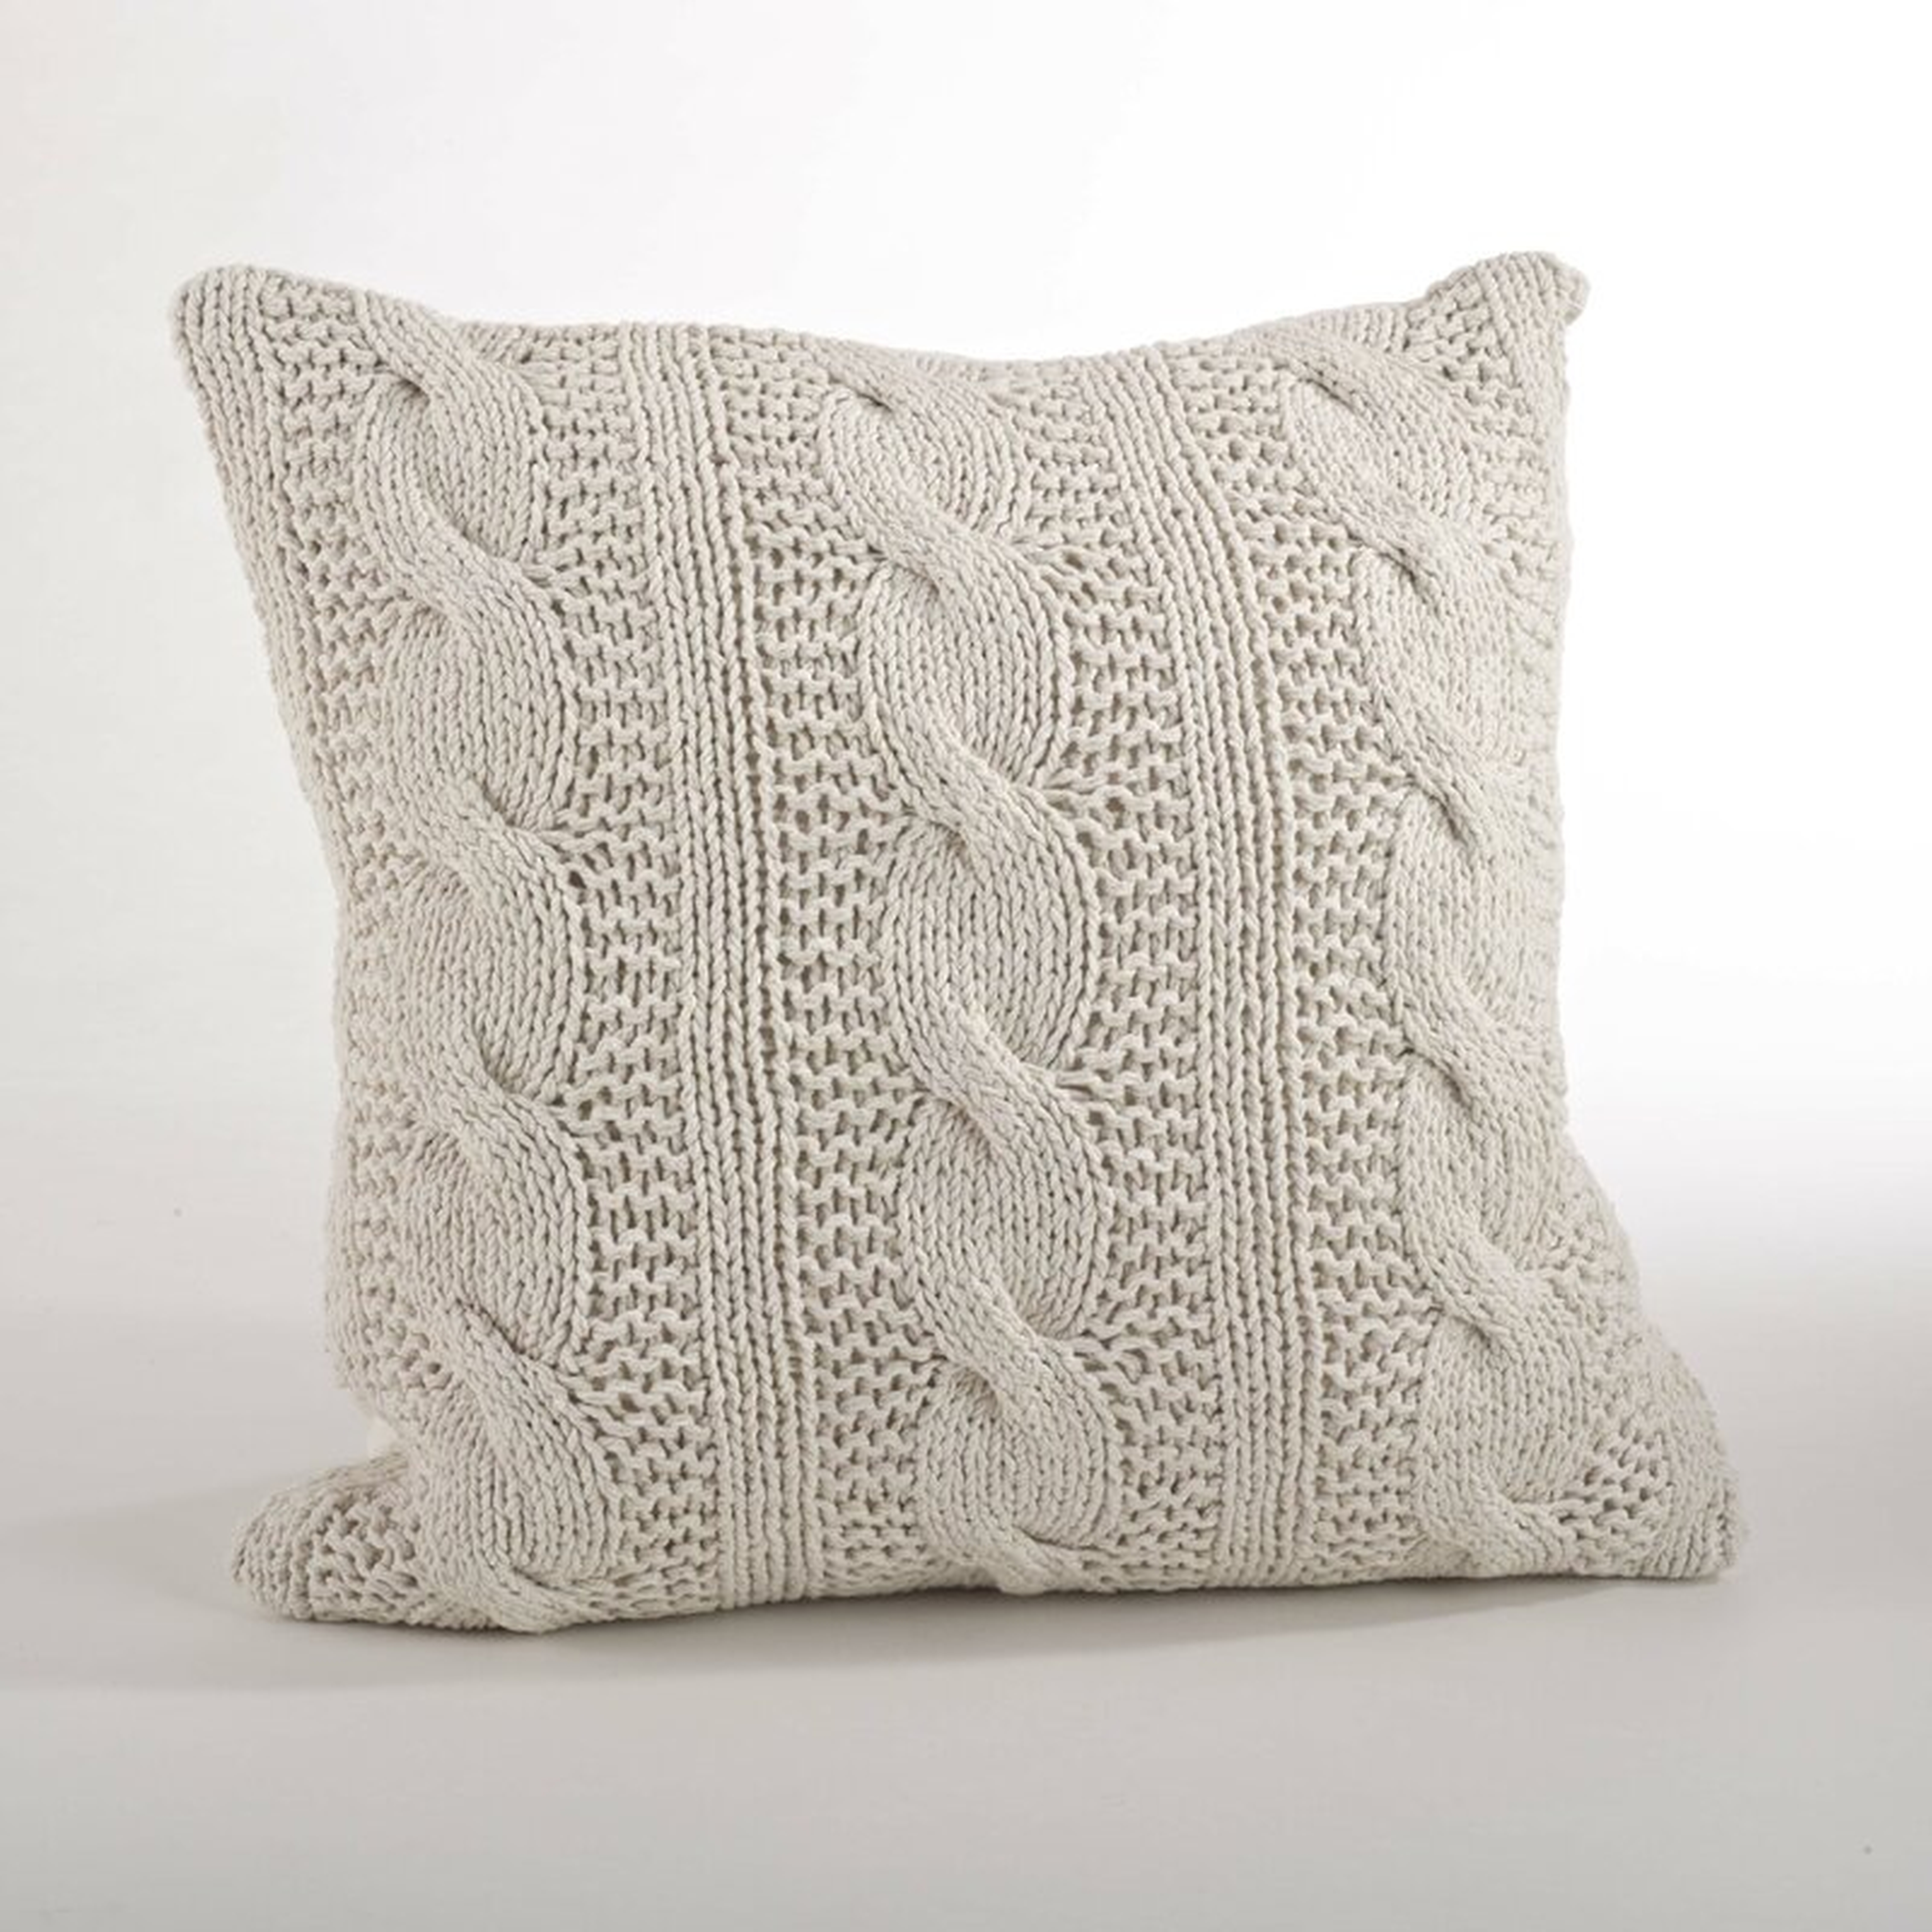 Remy Cable Knit Cotton Feather Throw Pillow - Birch Lane